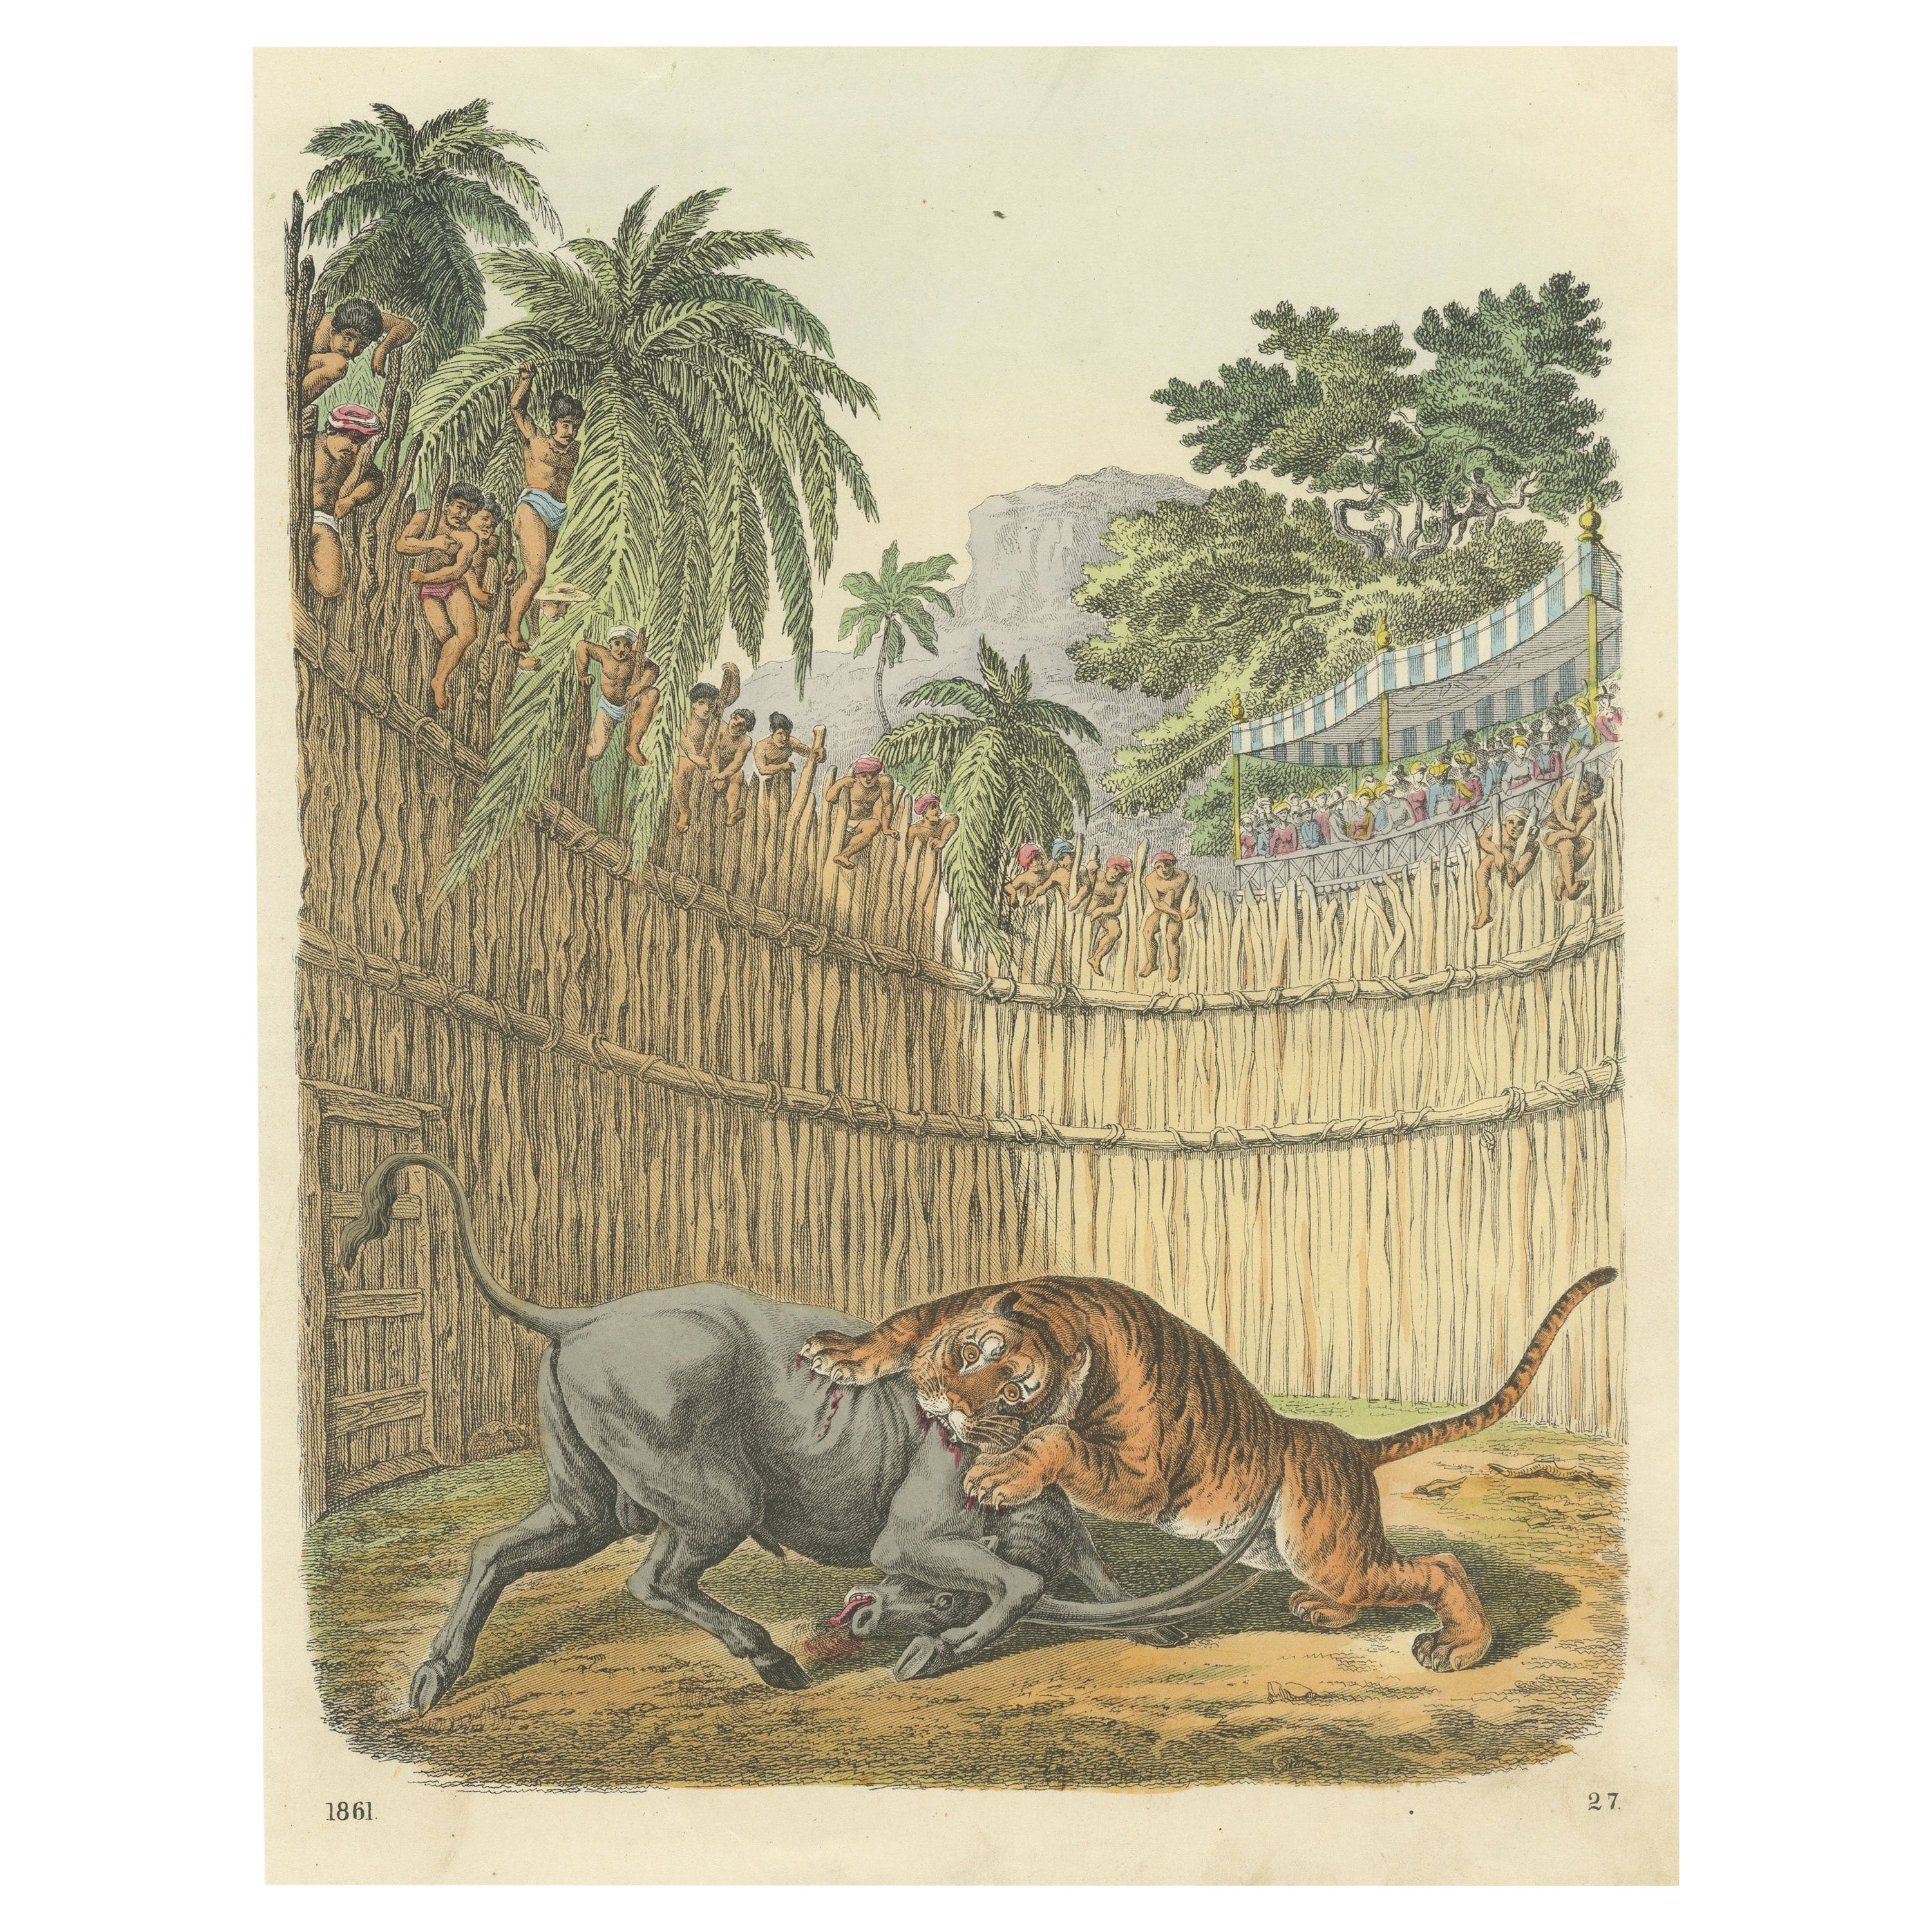 Original Antique Print of a Fight Between a Tiger and Antelope For Sale